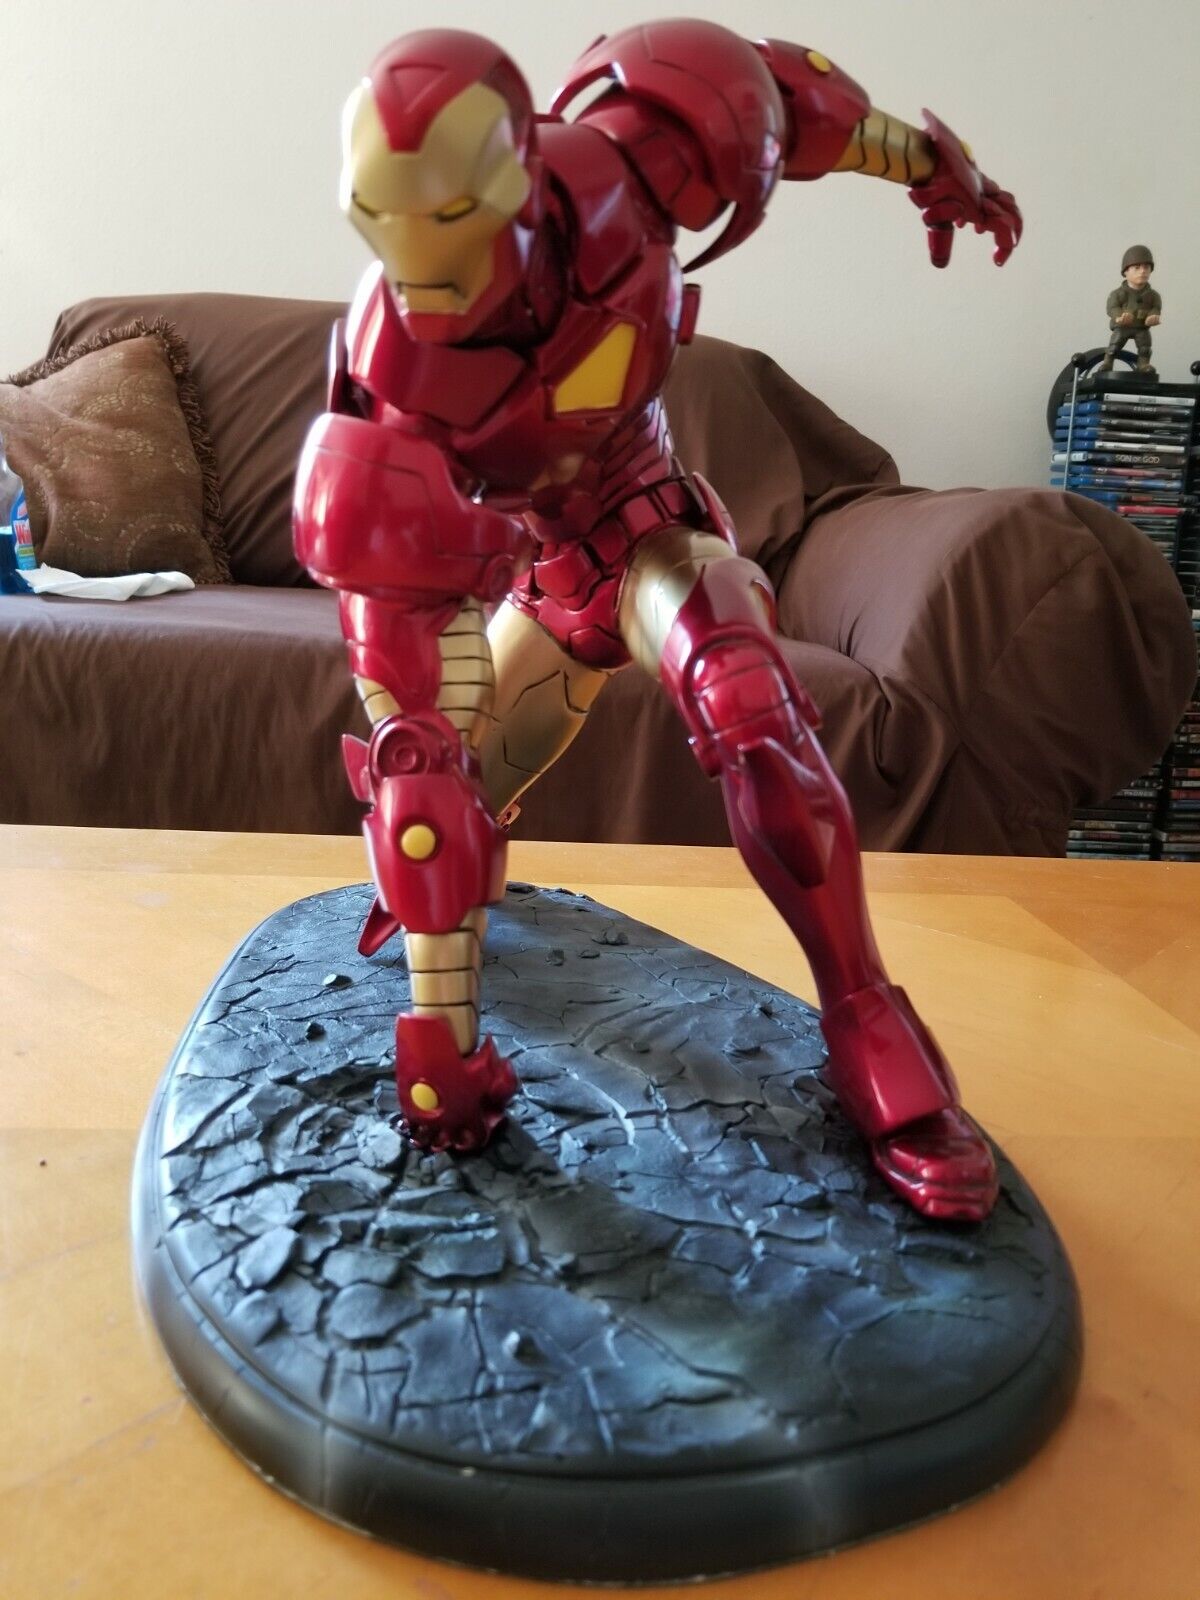 Sideshow Collectibles Exclusive Iron Man Comiquette Statue #451 of 500